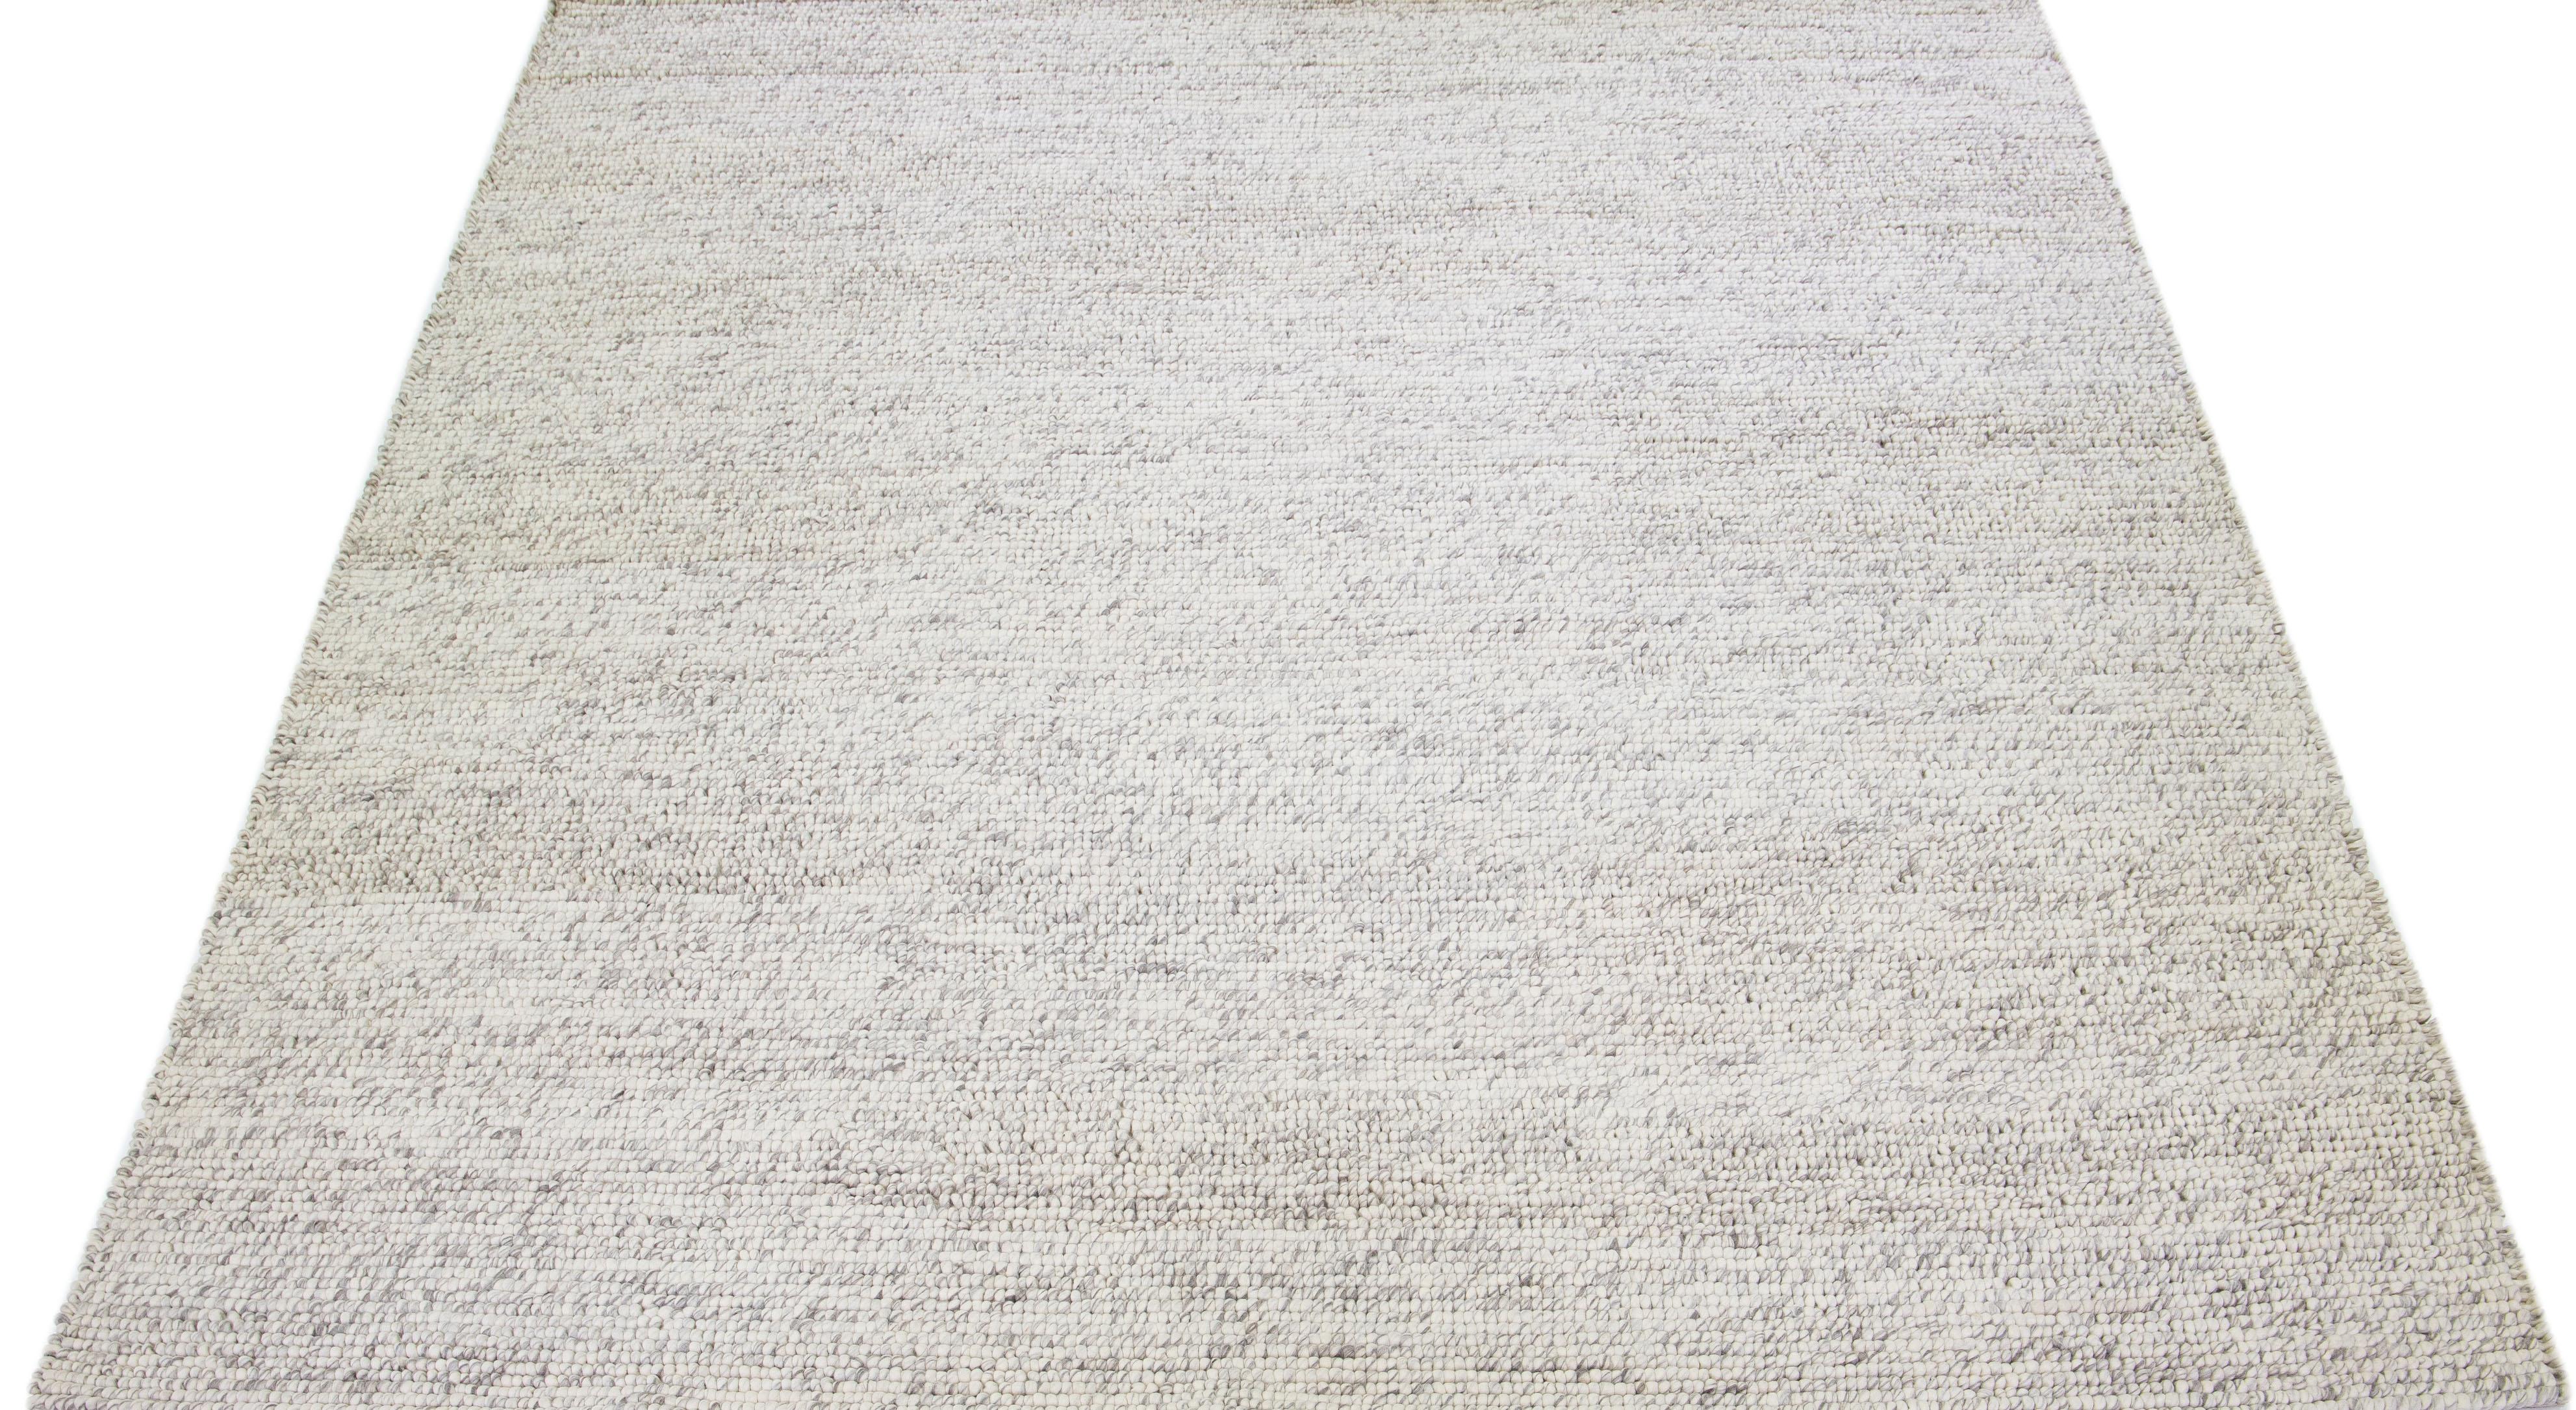 Beige Modern Felted Textuted Wool Rug by Apadana In New Condition For Sale In Norwalk, CT